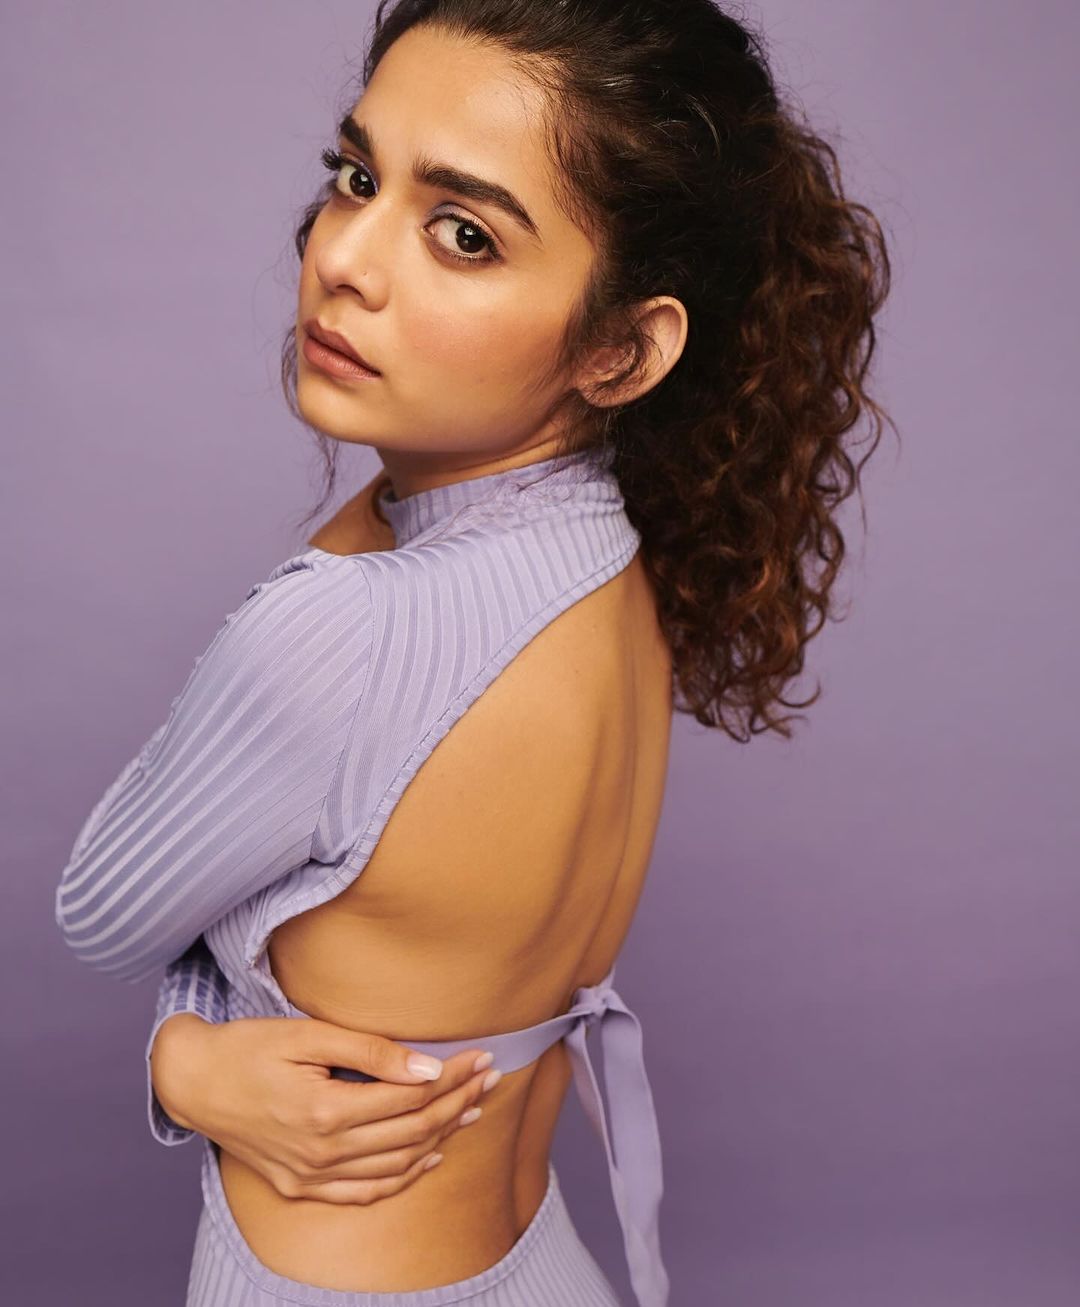 Bollywood young beauty mithila palkar awesome looks-Actressmithila, Bollywoodyoung, Mithila Palkar Photos,Spicy Hot Pics,Images,High Resolution WallPapers Download